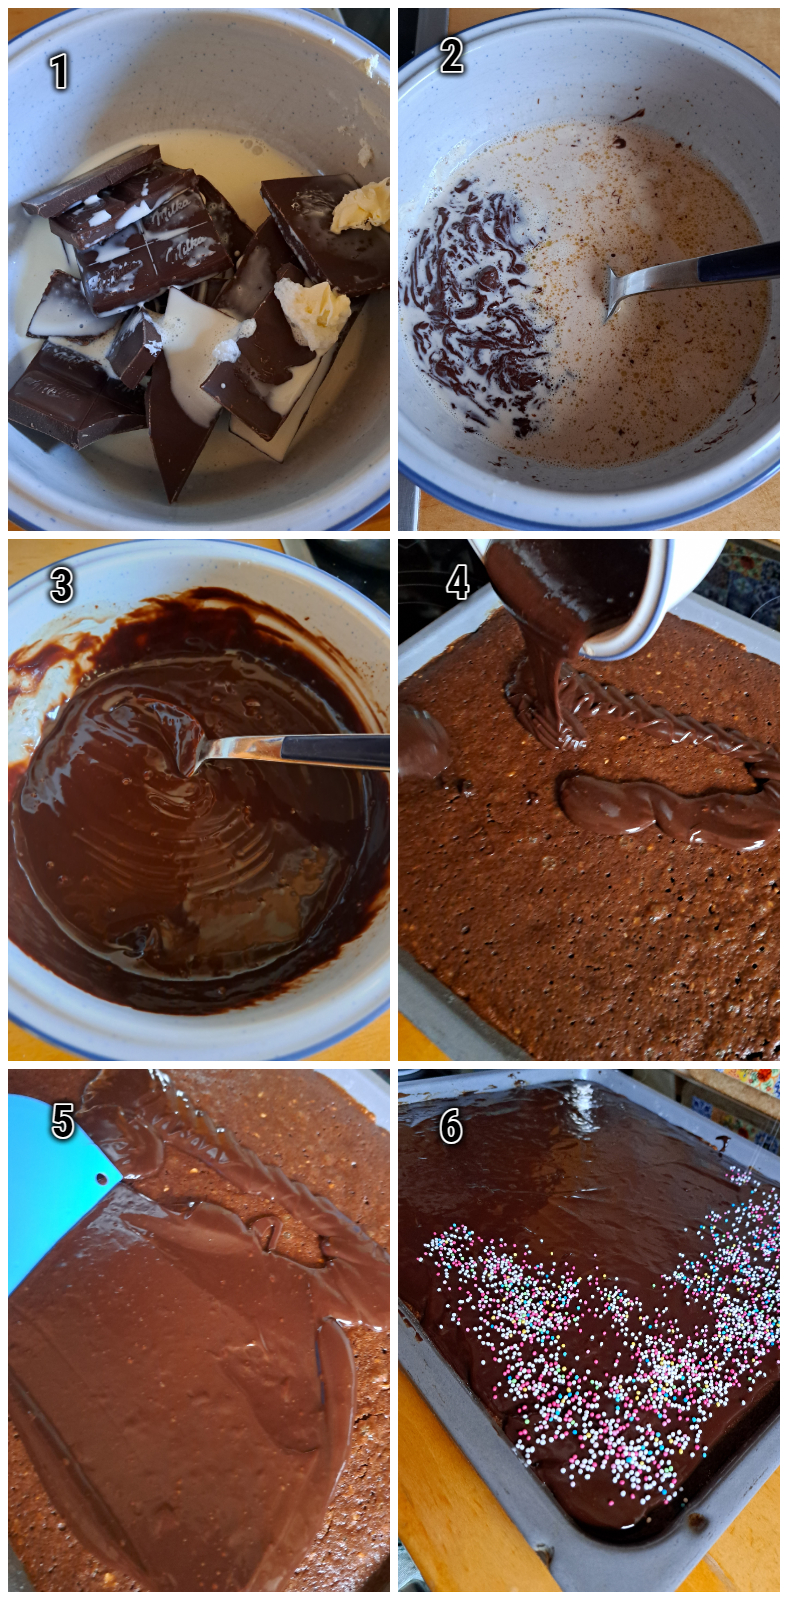  A step-by-step collage capturing the process of making chocolate glaze with high-quality dark chocolate and heavy cream, spreading it on a freshly baked but cooled German chocolate spice cake, and finishing by sprinkling sugar sprinkles on top.